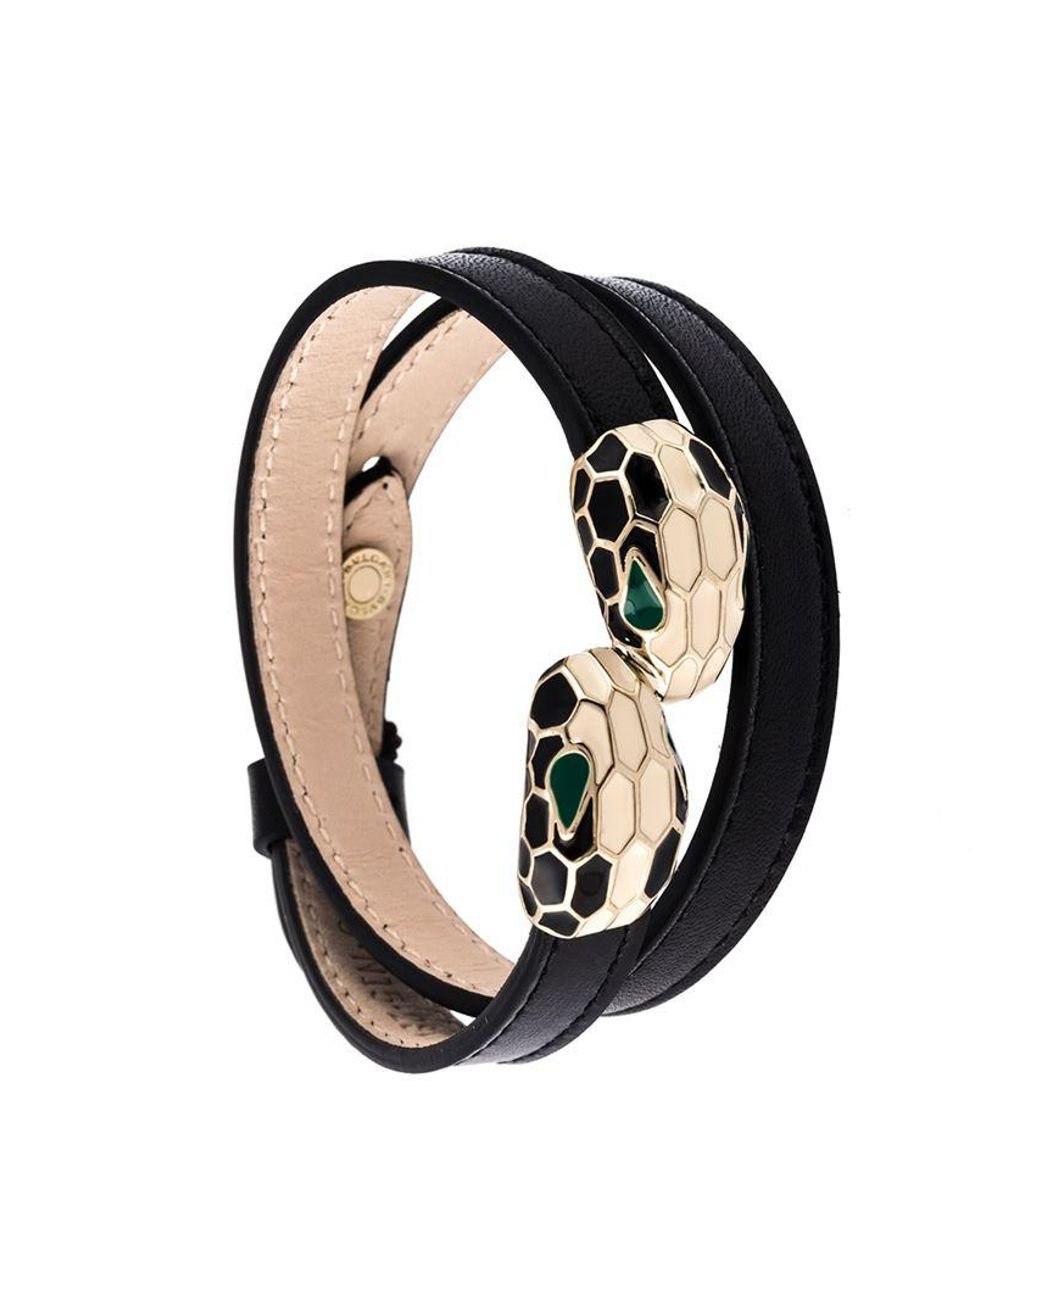 Bvlgari White Gold Serpenti Viper Bracelet Available For Immediate Sale At  Sotheby's